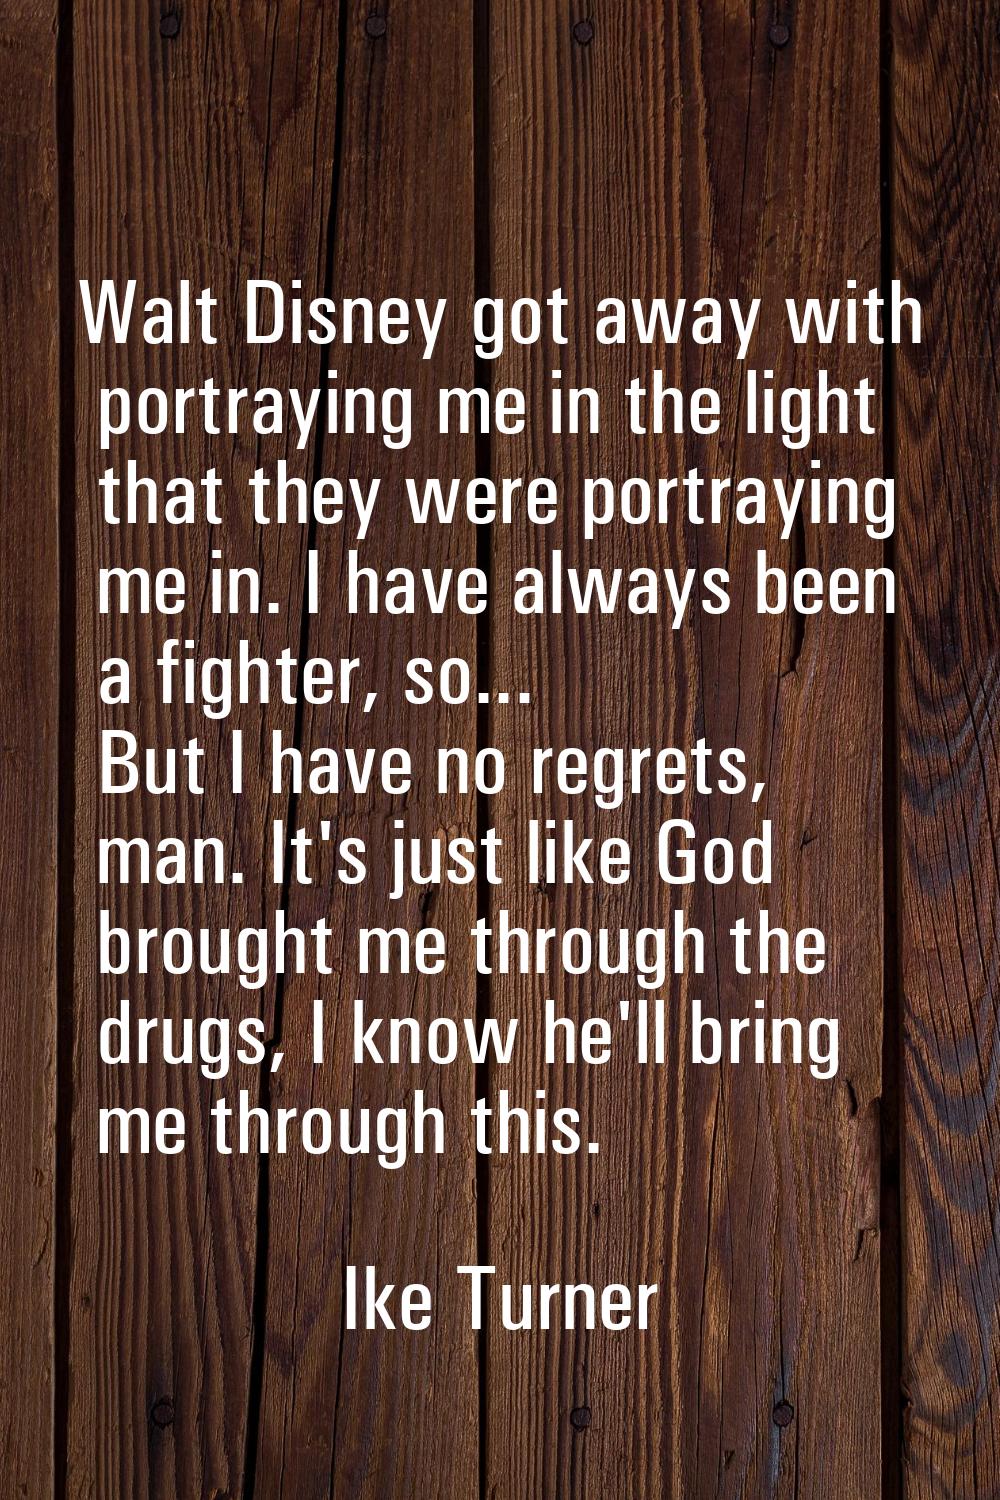 Walt Disney got away with portraying me in the light that they were portraying me in. I have always